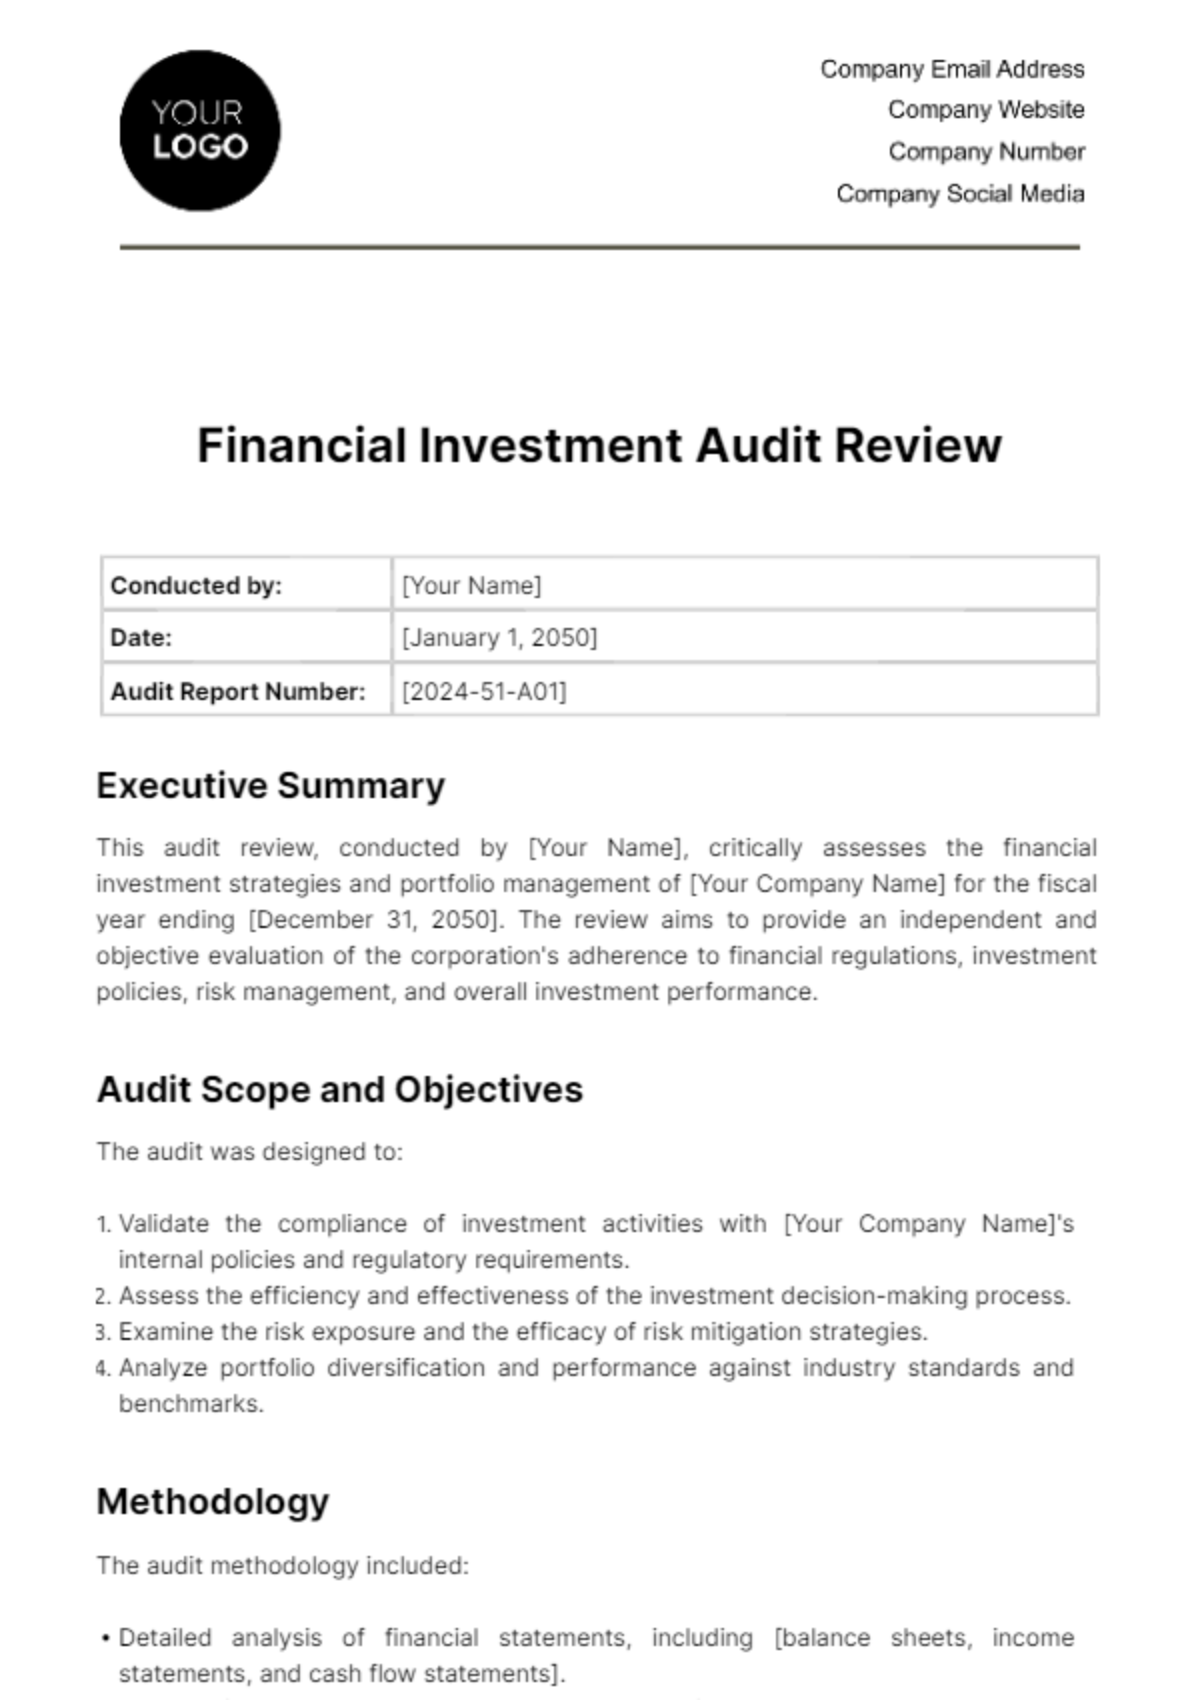 Free Financial Investment Audit Review Template